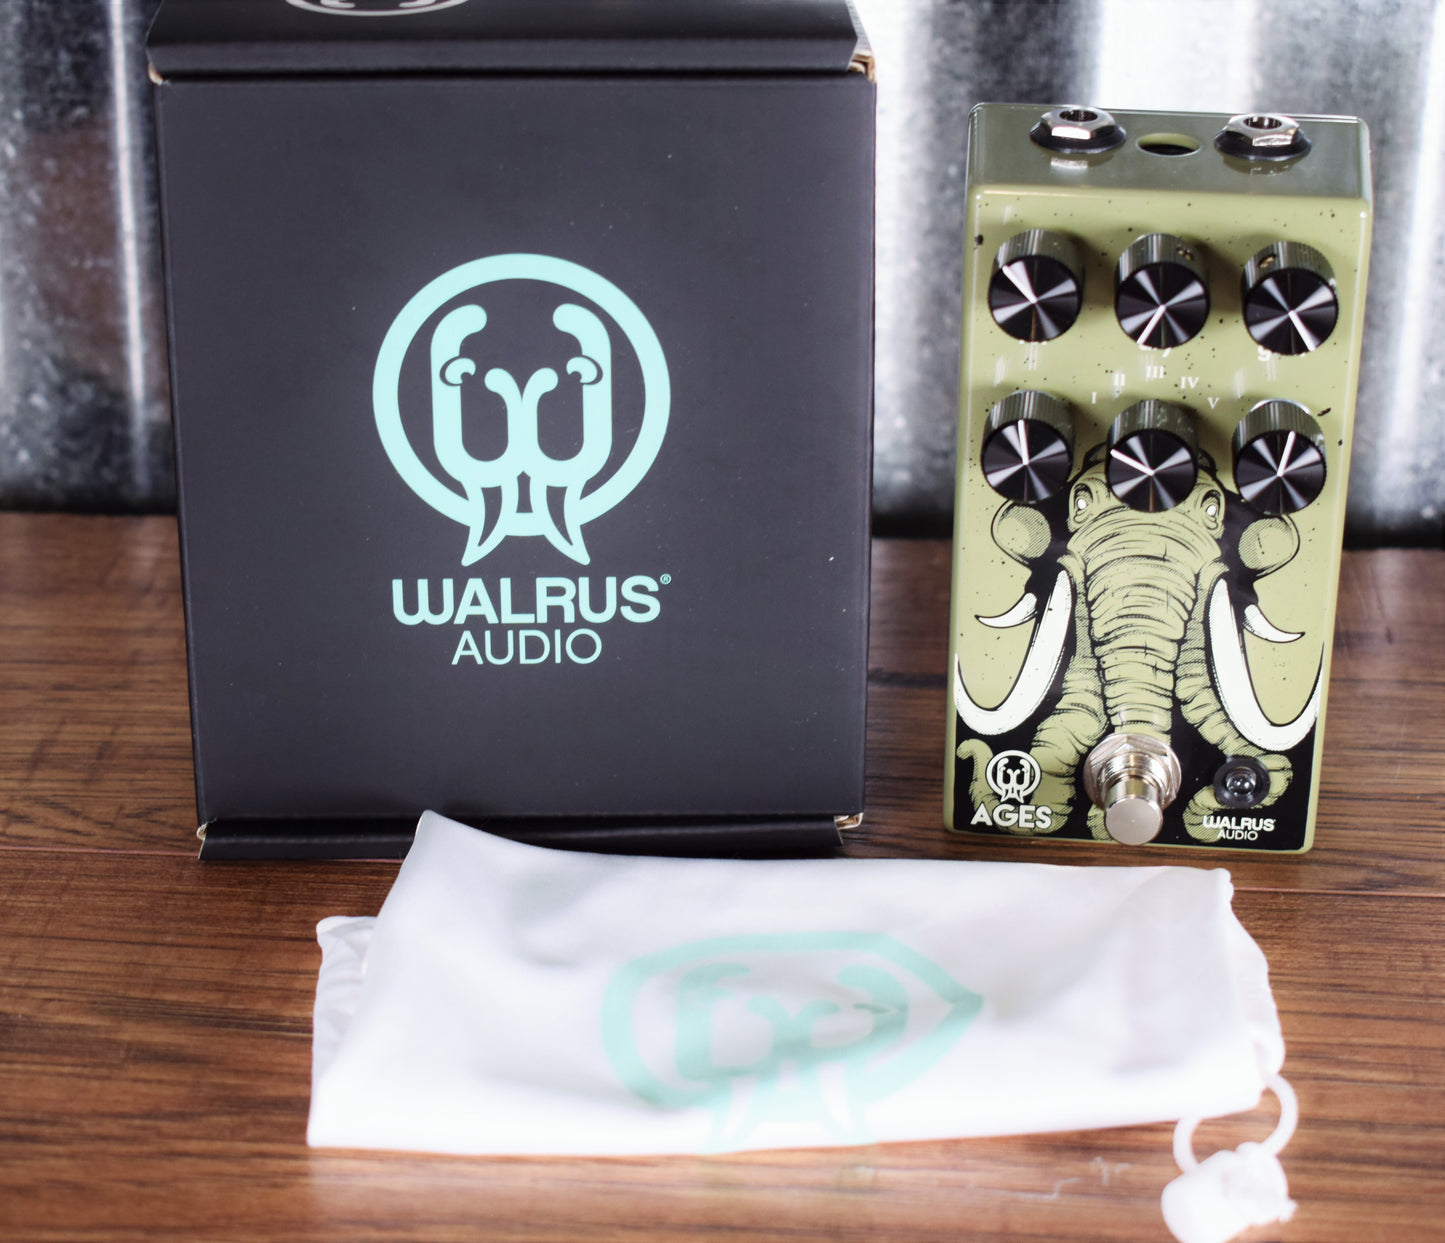 Walrus Audio Ages 5 State Overdrive Guitar Effect Pedal